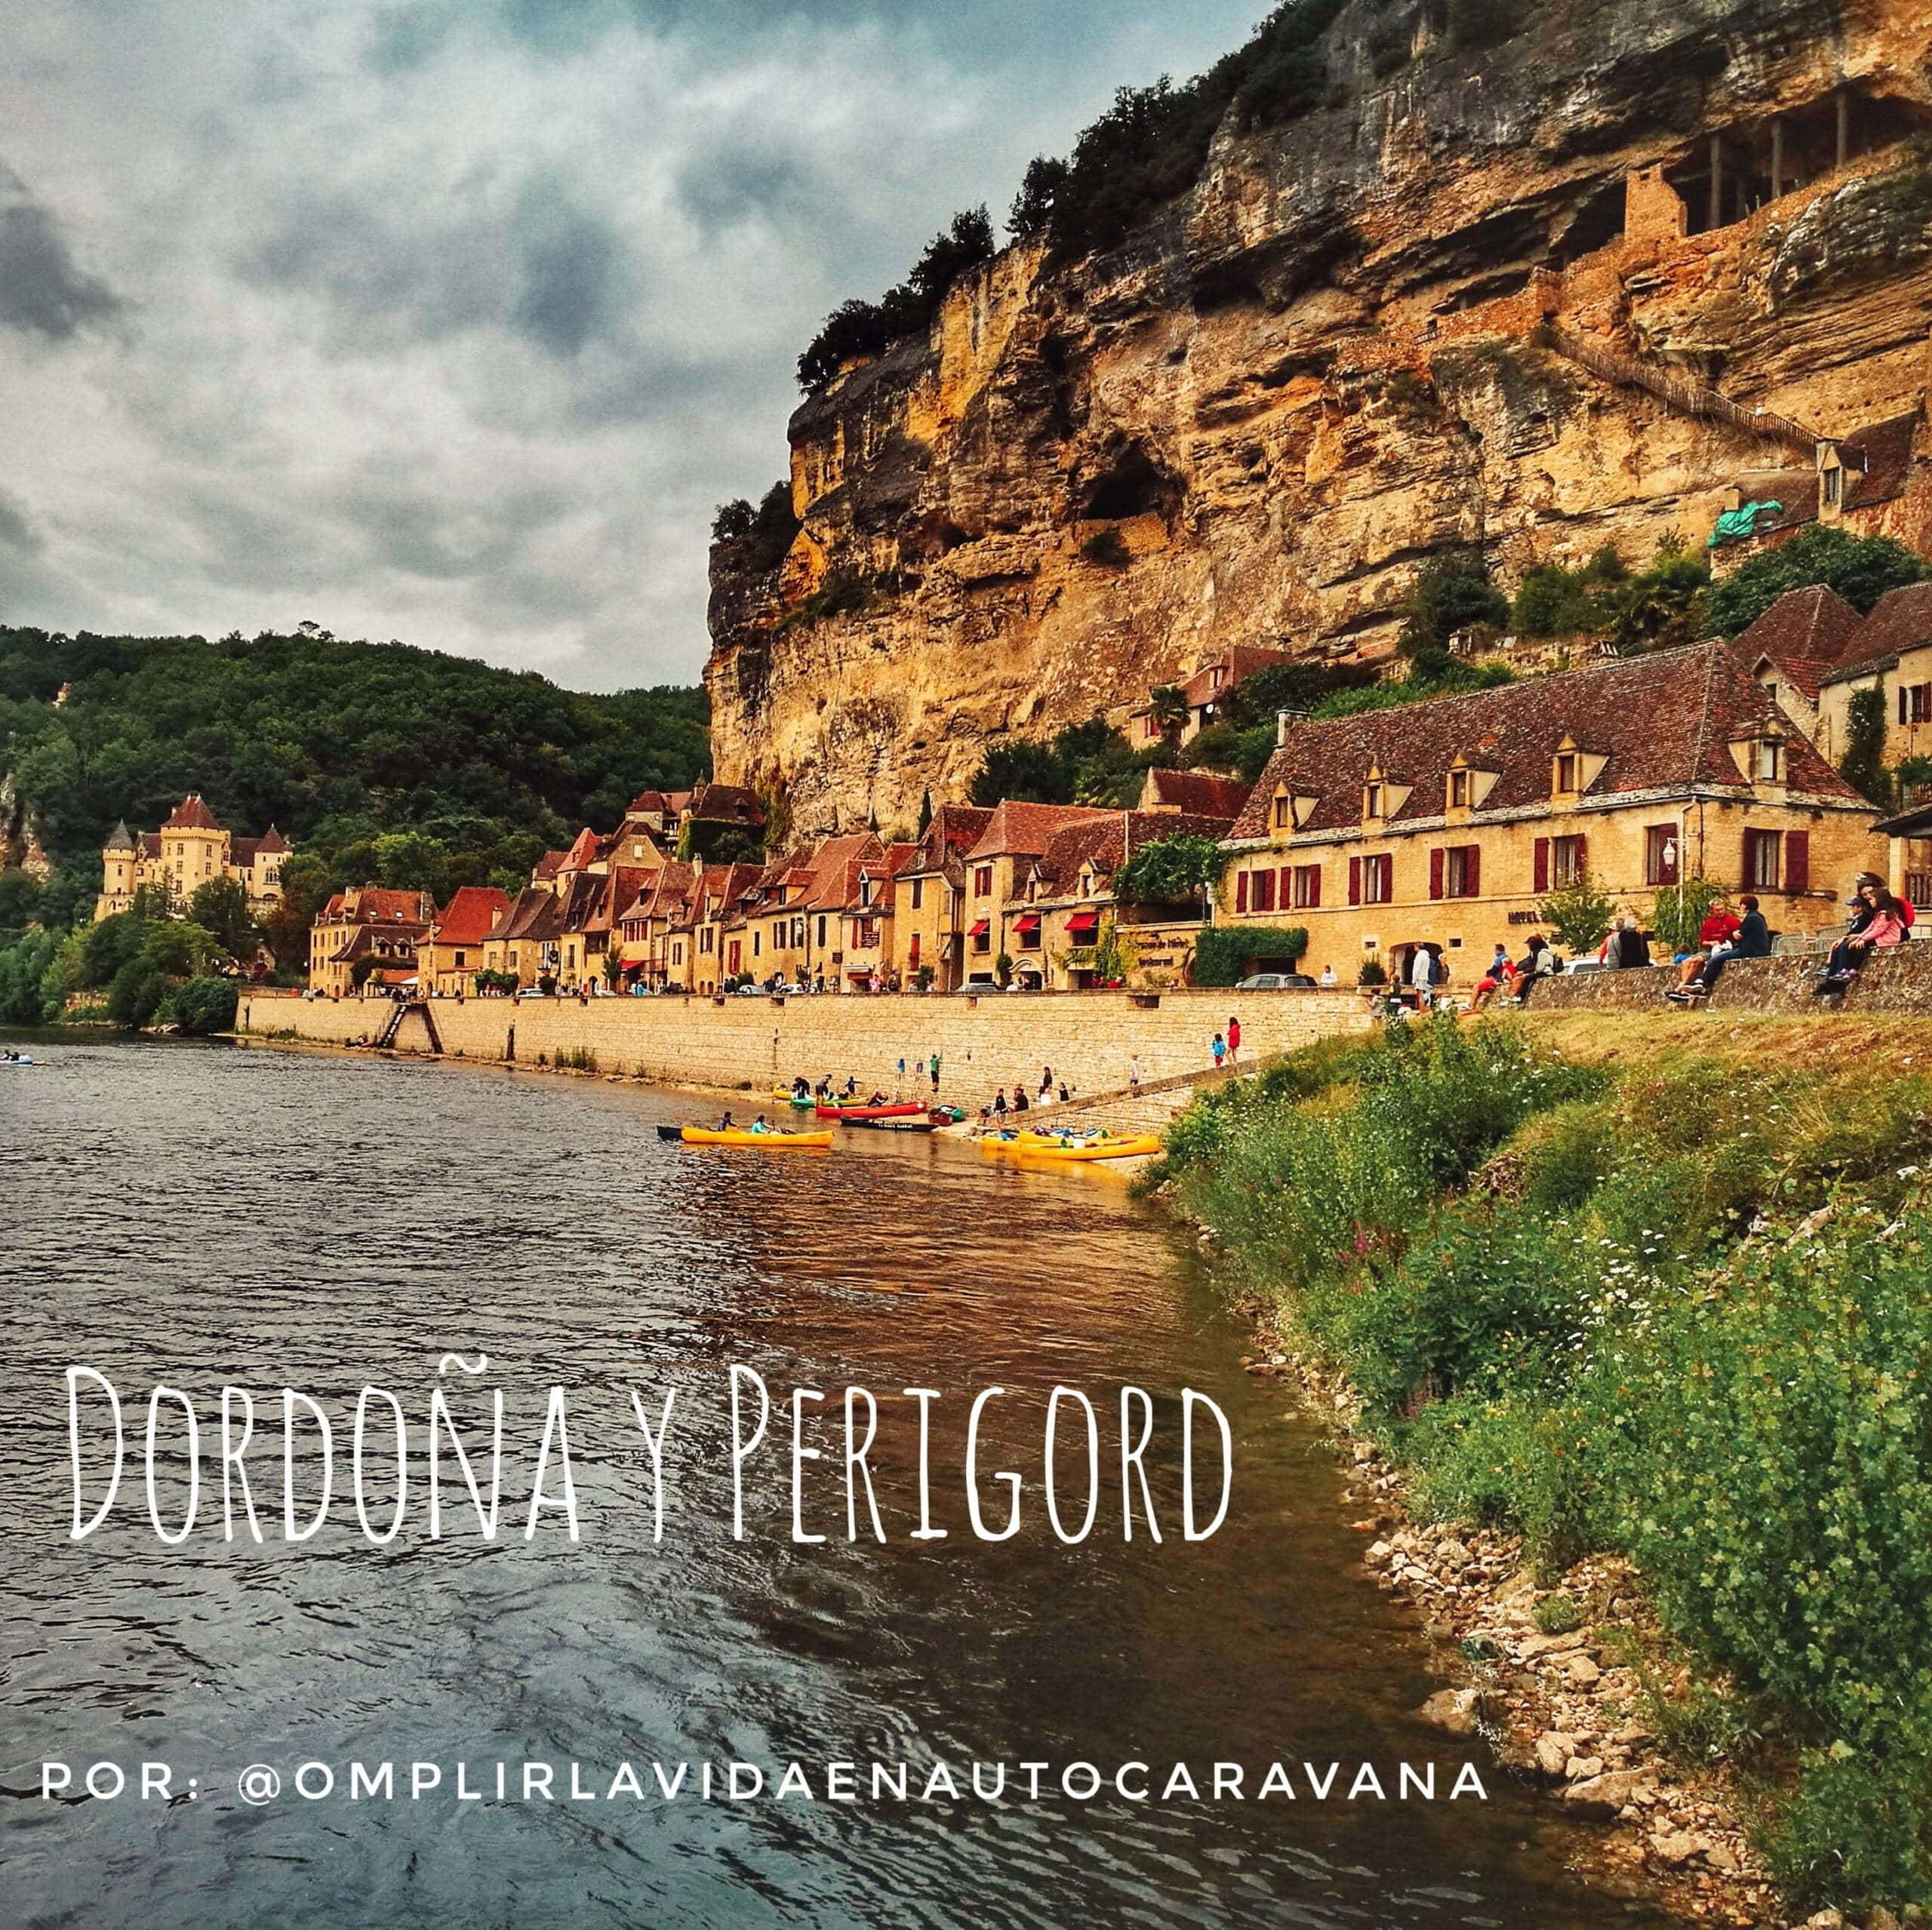 Read more about the article Route through 8 essential plans of the French Dordogne and the Perigord by motorhome by @omplintlavidaenautocaravana